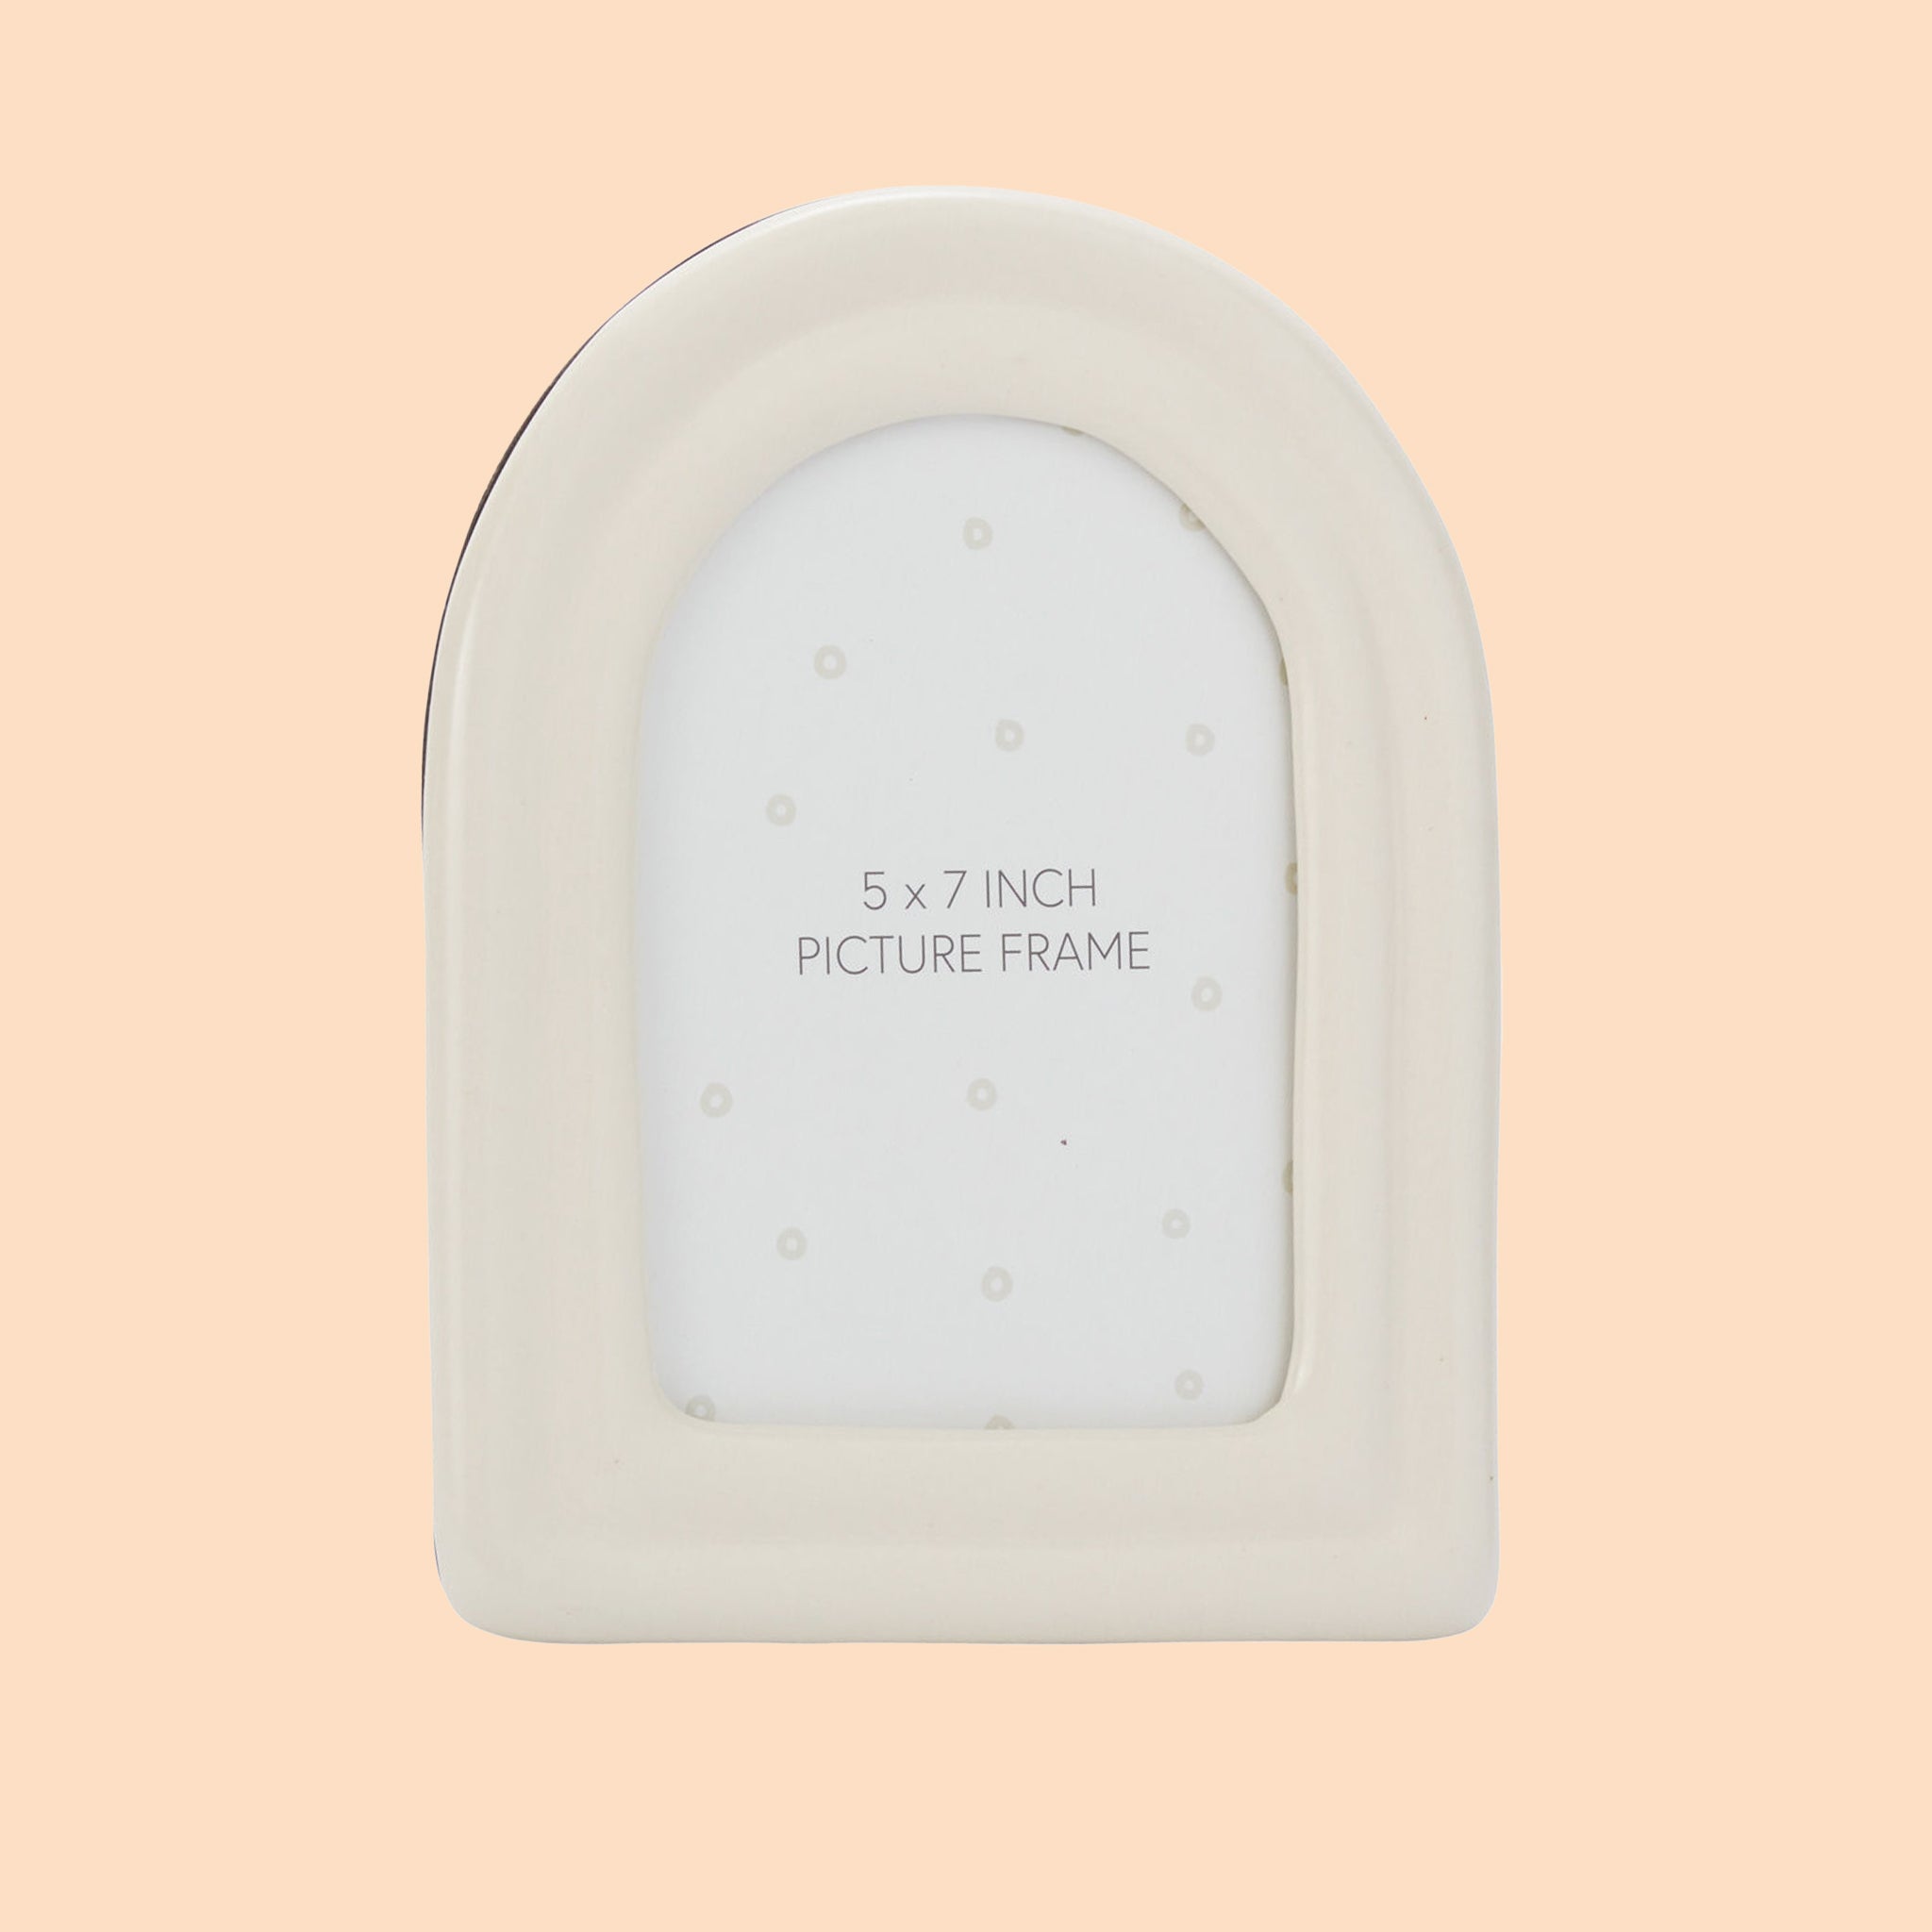 On a peachy background is a white arched ceramic frame. 